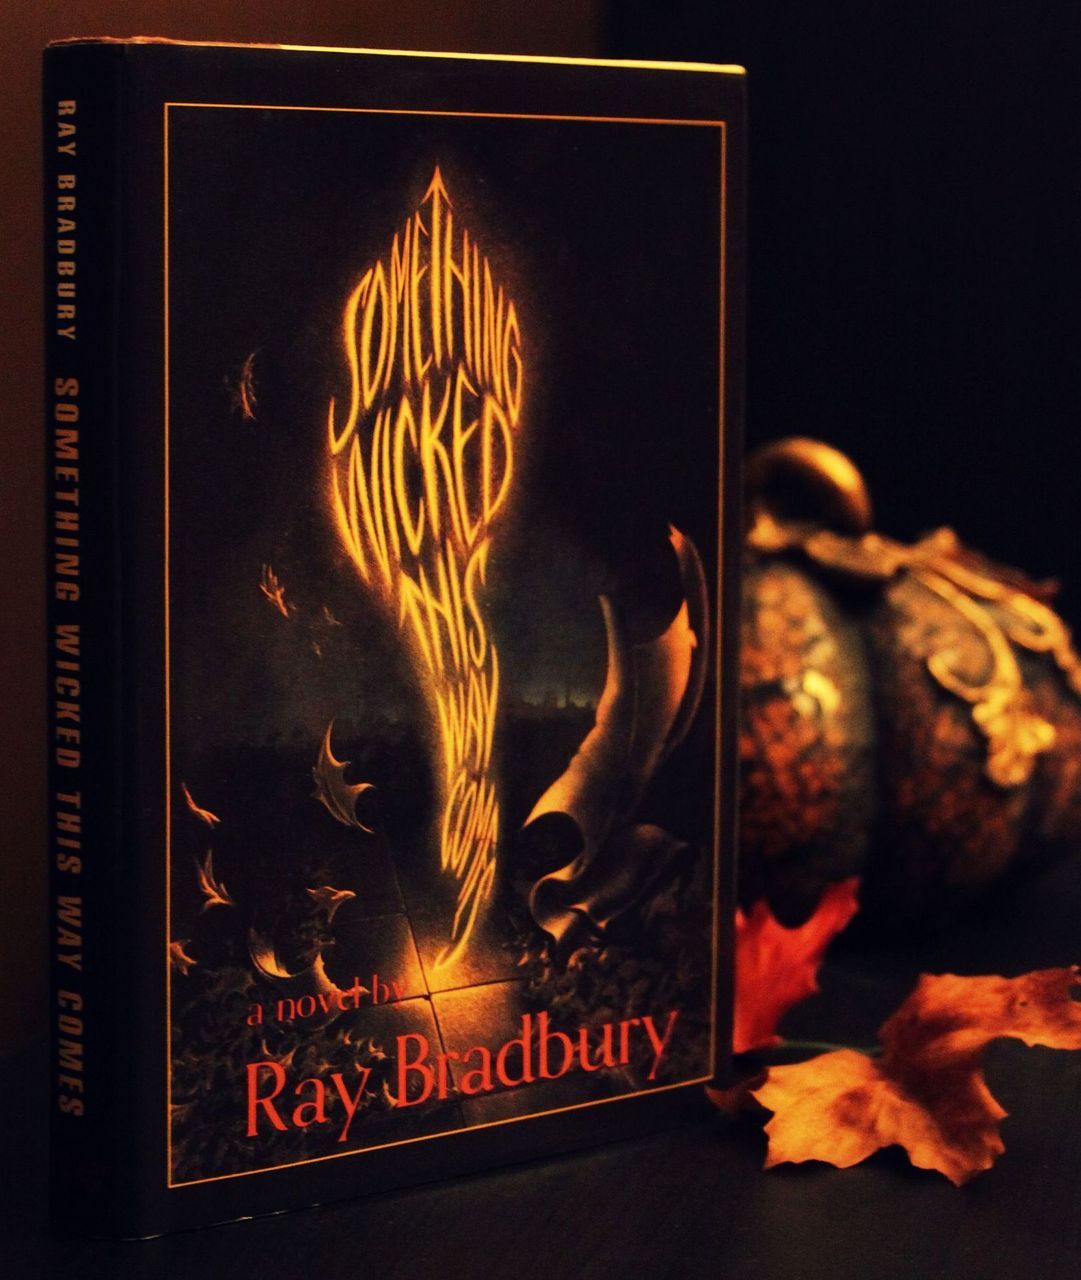 Something Wicked This Way Comes by Ray Bradbury. Required Autumn reading.
“Every page is a crackling brown leaf, blown about on orchard- and bonfire-scented winds. Every bit of description is painfully evocative, extraordinarily vivid. It’s a...